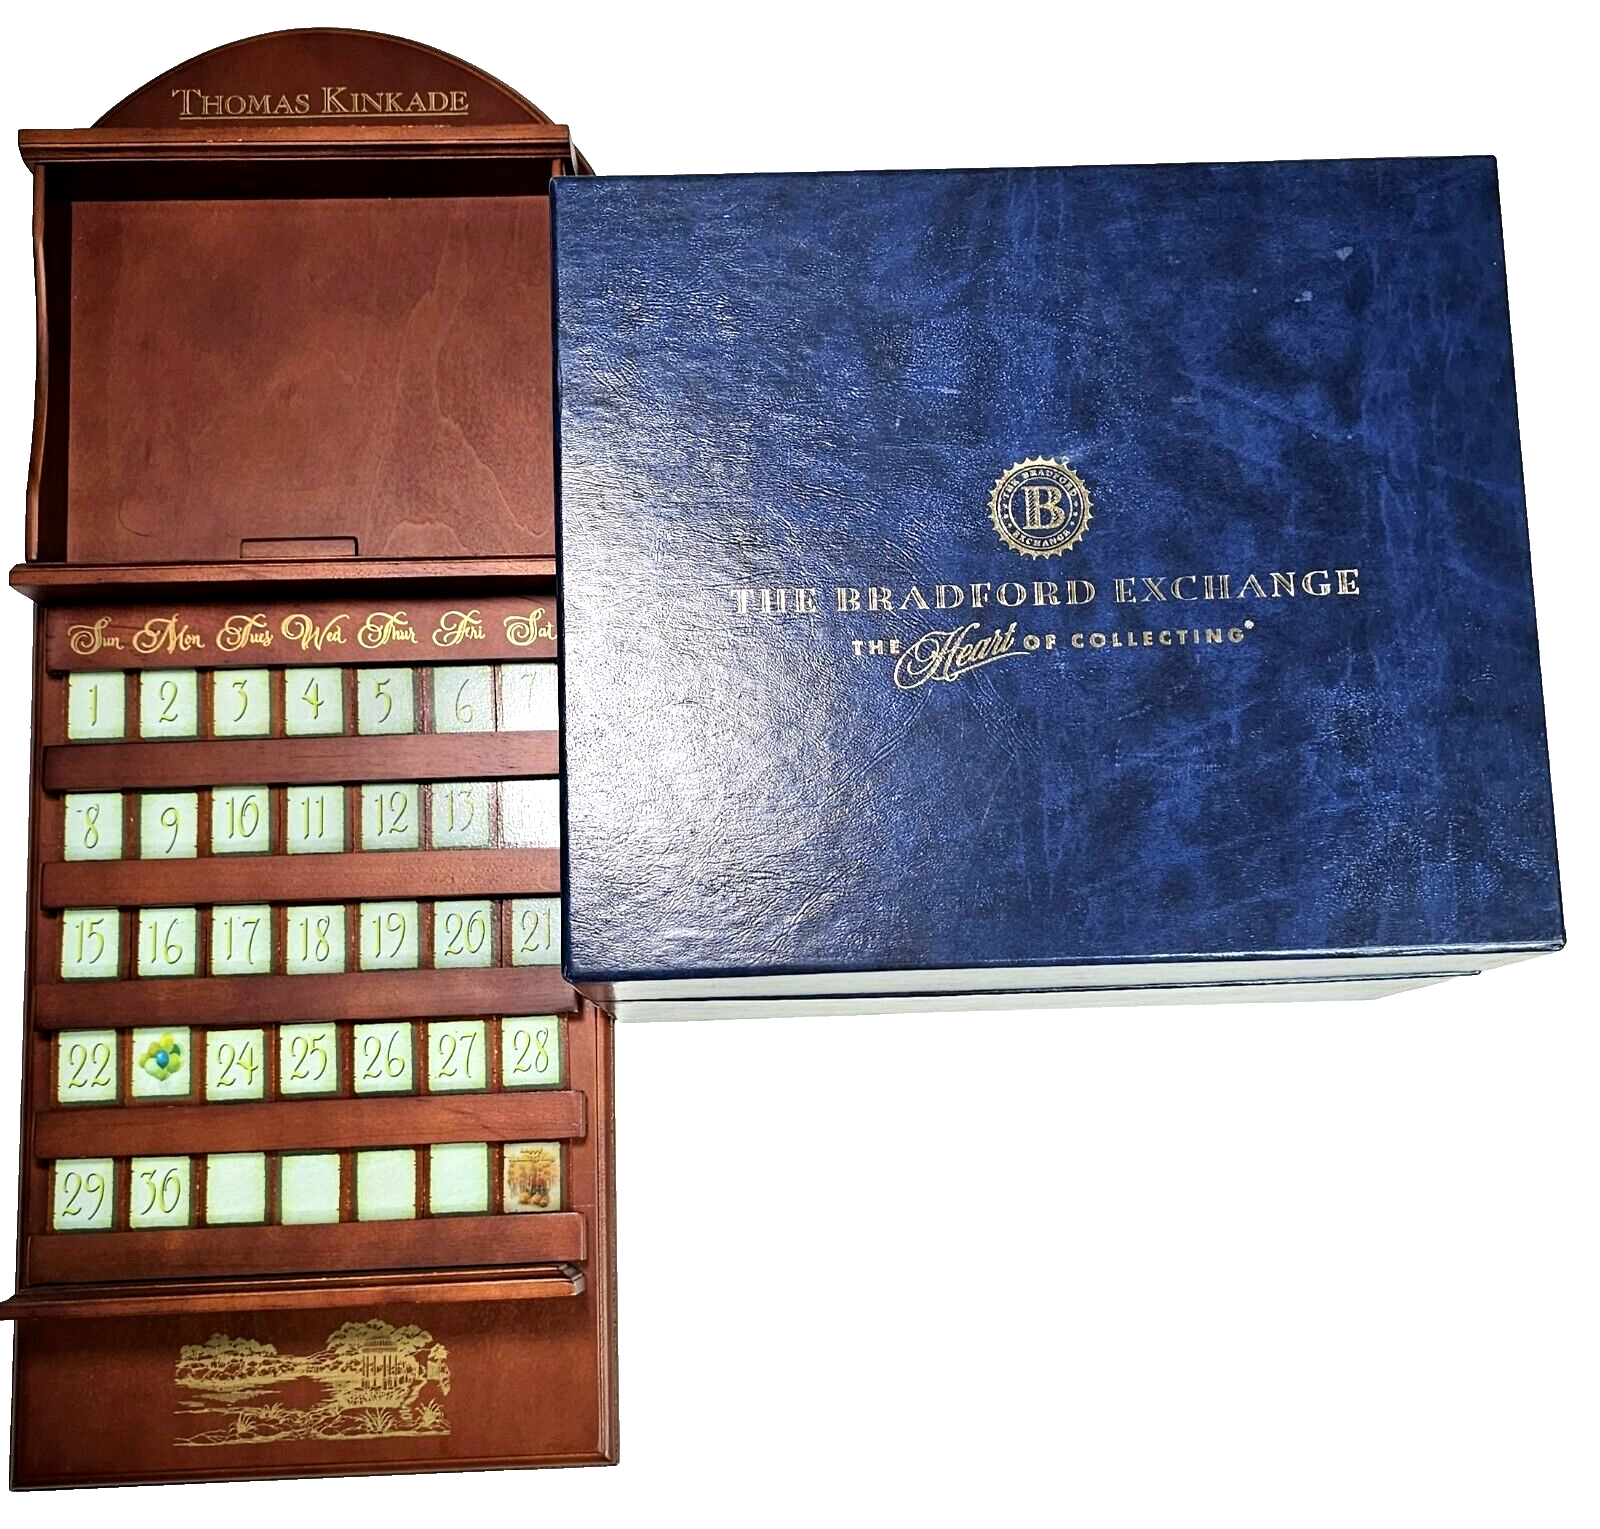 The Bradford Exchange Perpetual Calendar - T. Kinkade - Gifts From God's  Garden - $199.99